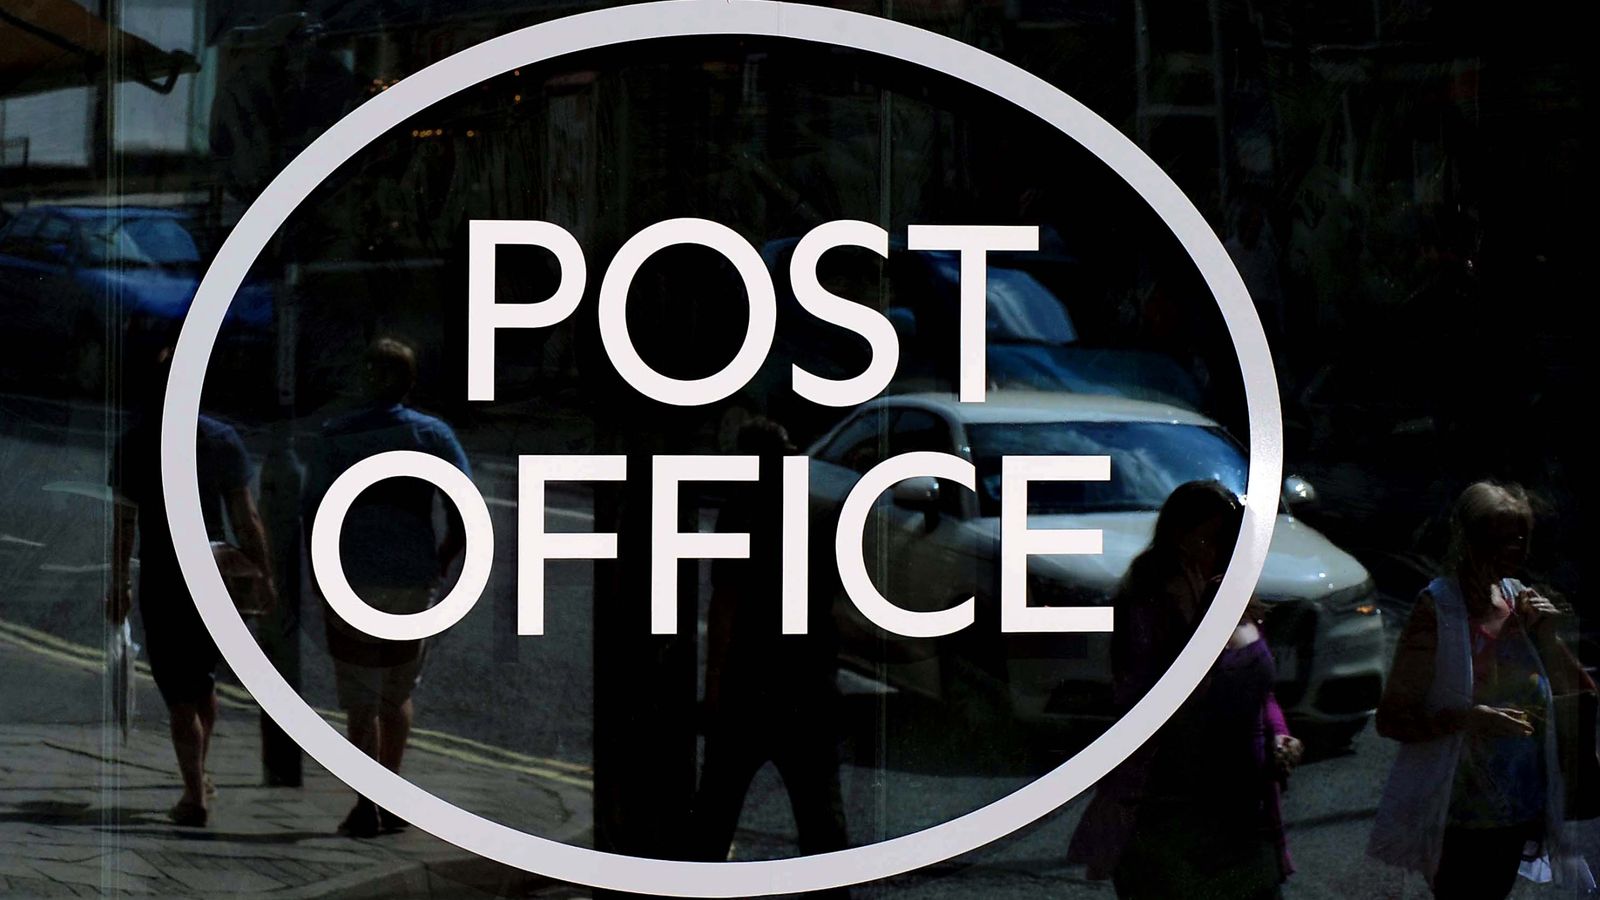 Post Office would stand by prosecution of more than 350 sub-postmasters, boss told minister in letter